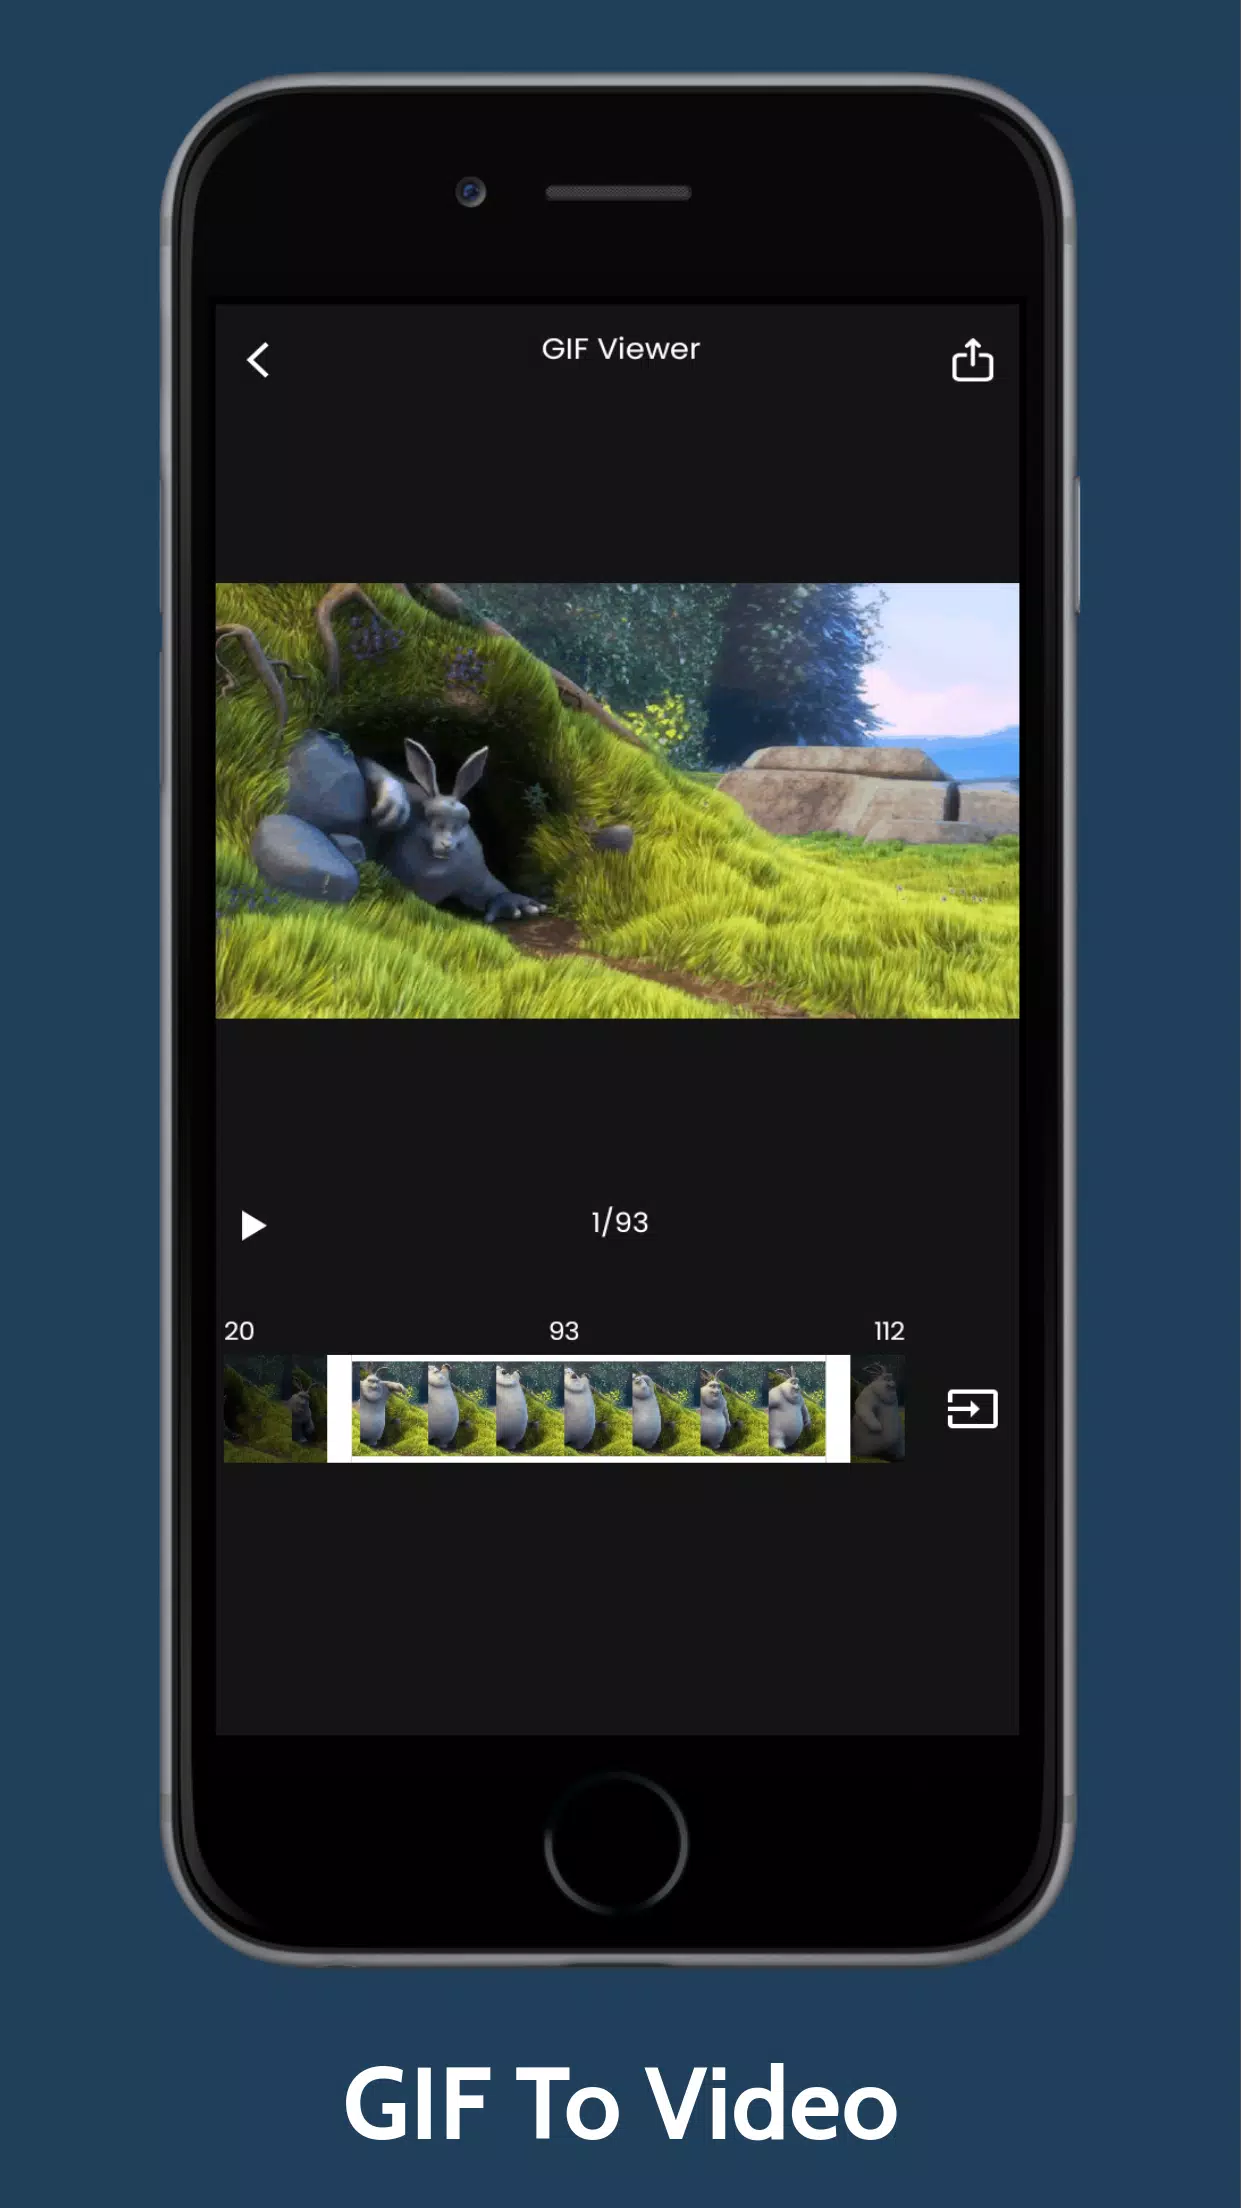 Download do APK de GIF To Video, GIF To MP4 para Android